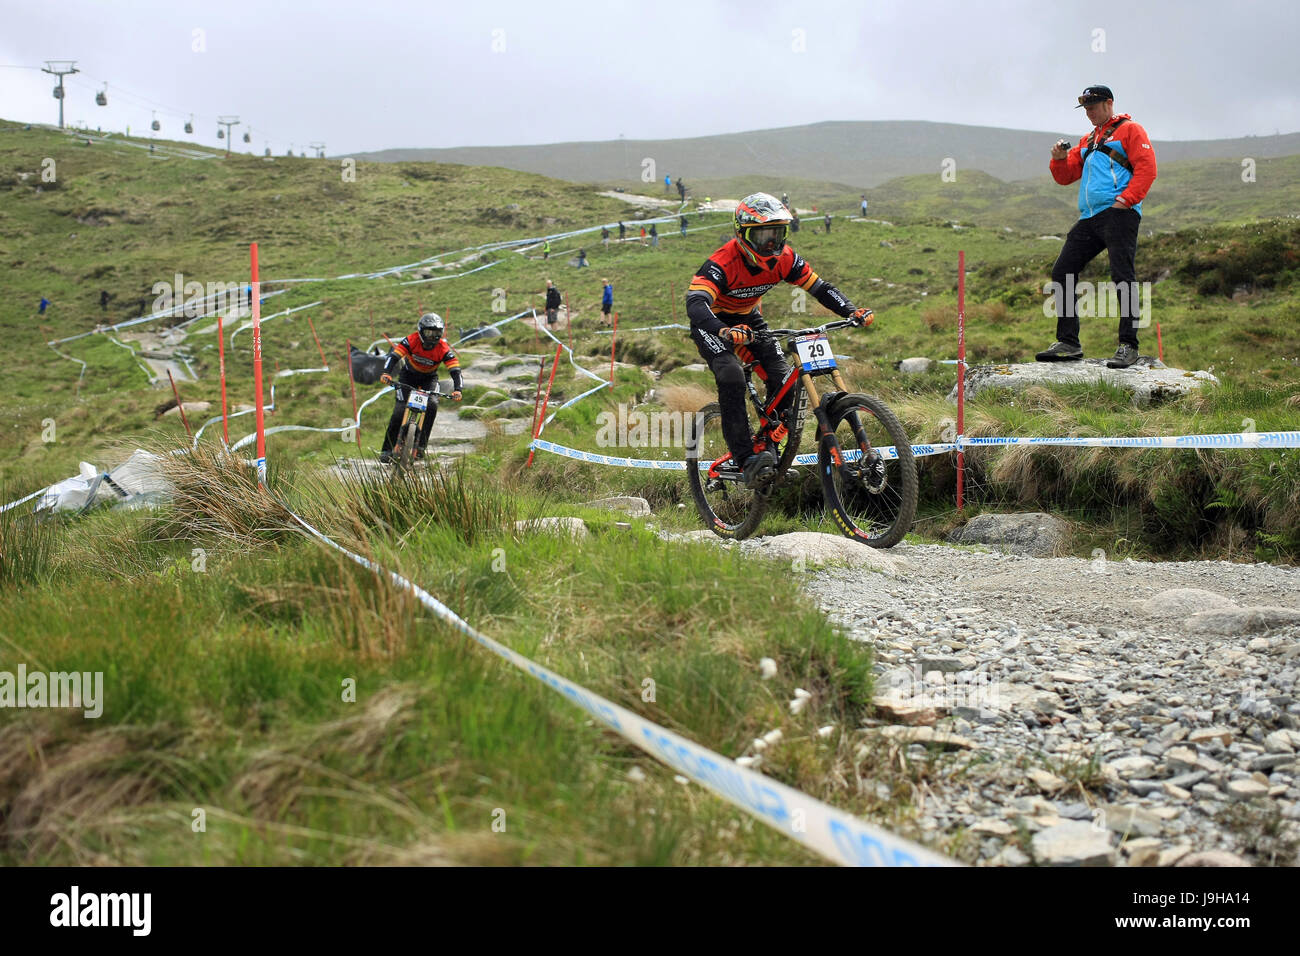 Fort William, Scotland. 2nd June, 2017. Steve Peat watching riders Alex Marin and Matthew Simmonds practicing on the course for Sunday's Downhill World Cup. Malcolm Gallon/Alamy Live News Stock Photo